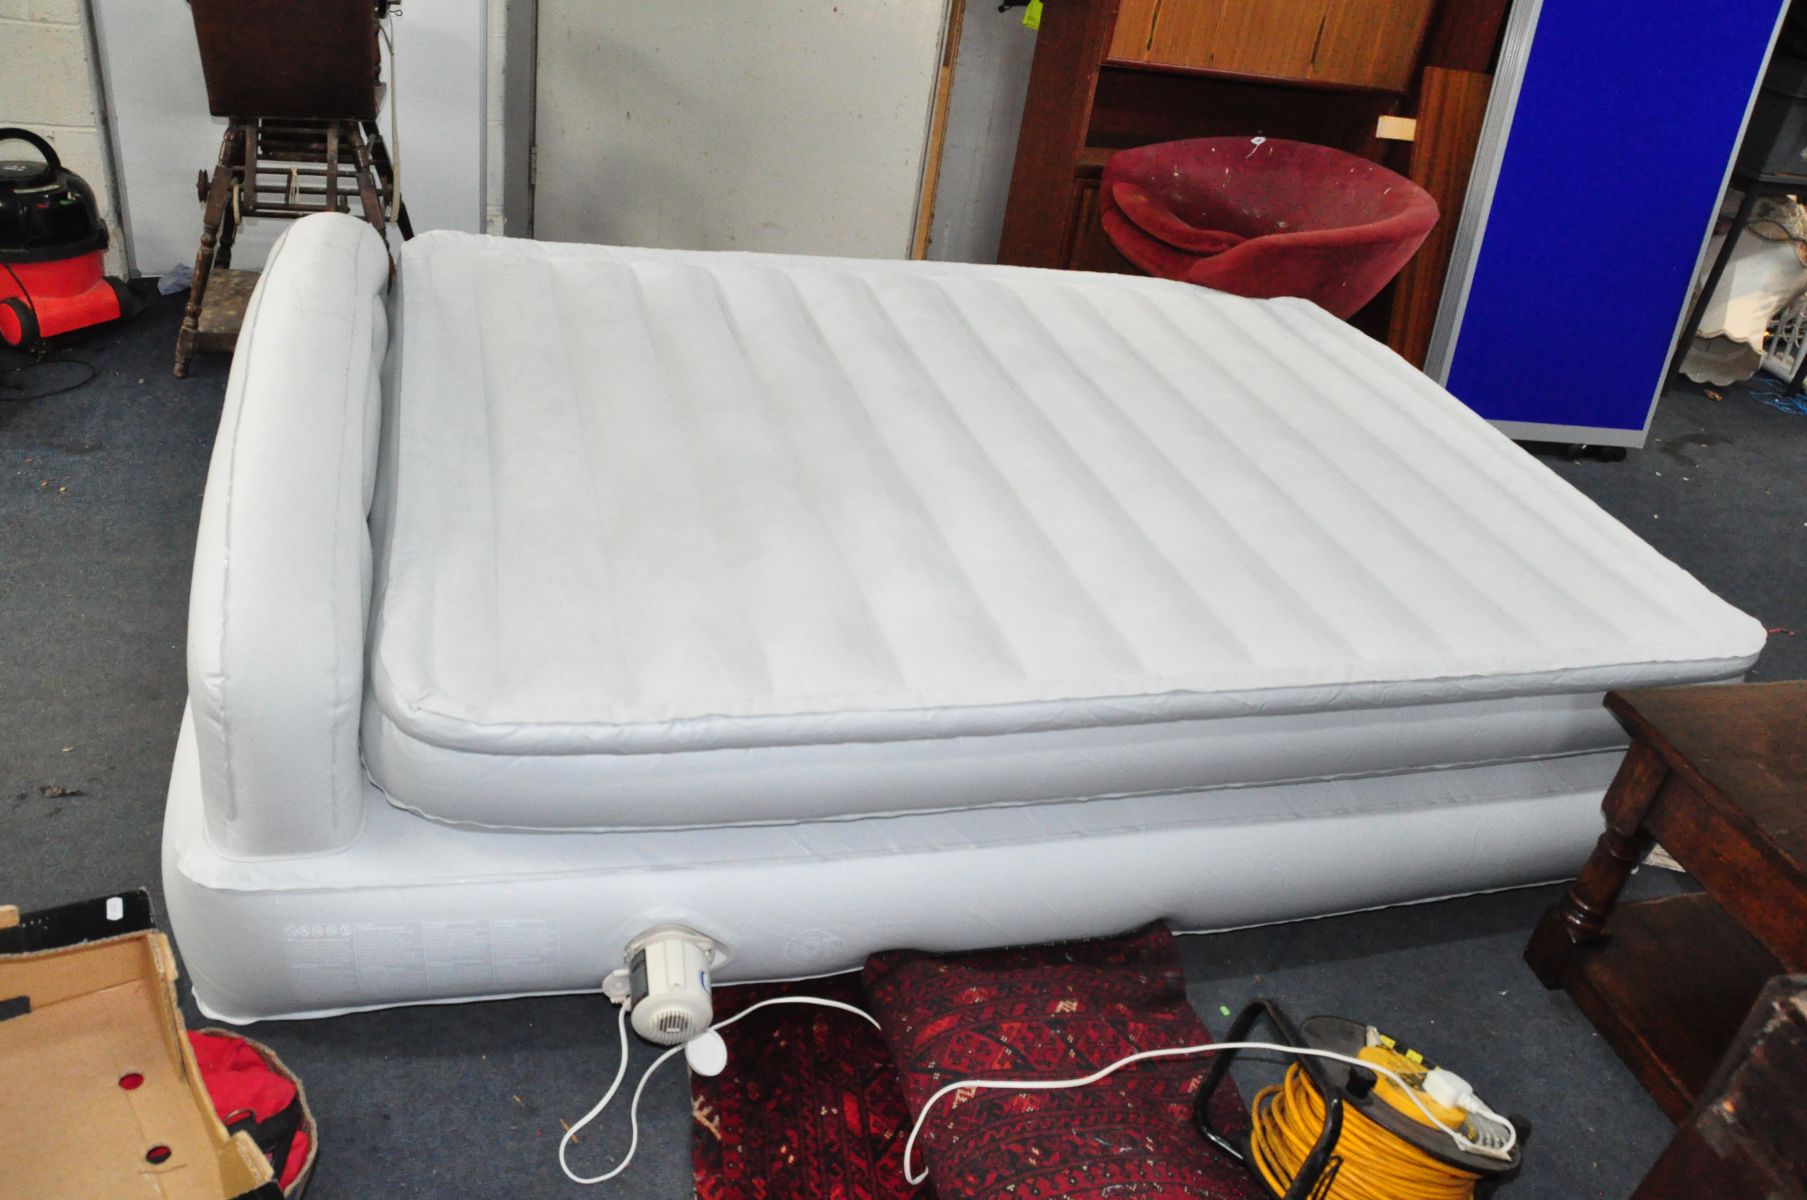 AN AEROBED INFLATABLE BED, 5ft wide with pump and bag (PAT pass and working), a pair of Sovereign